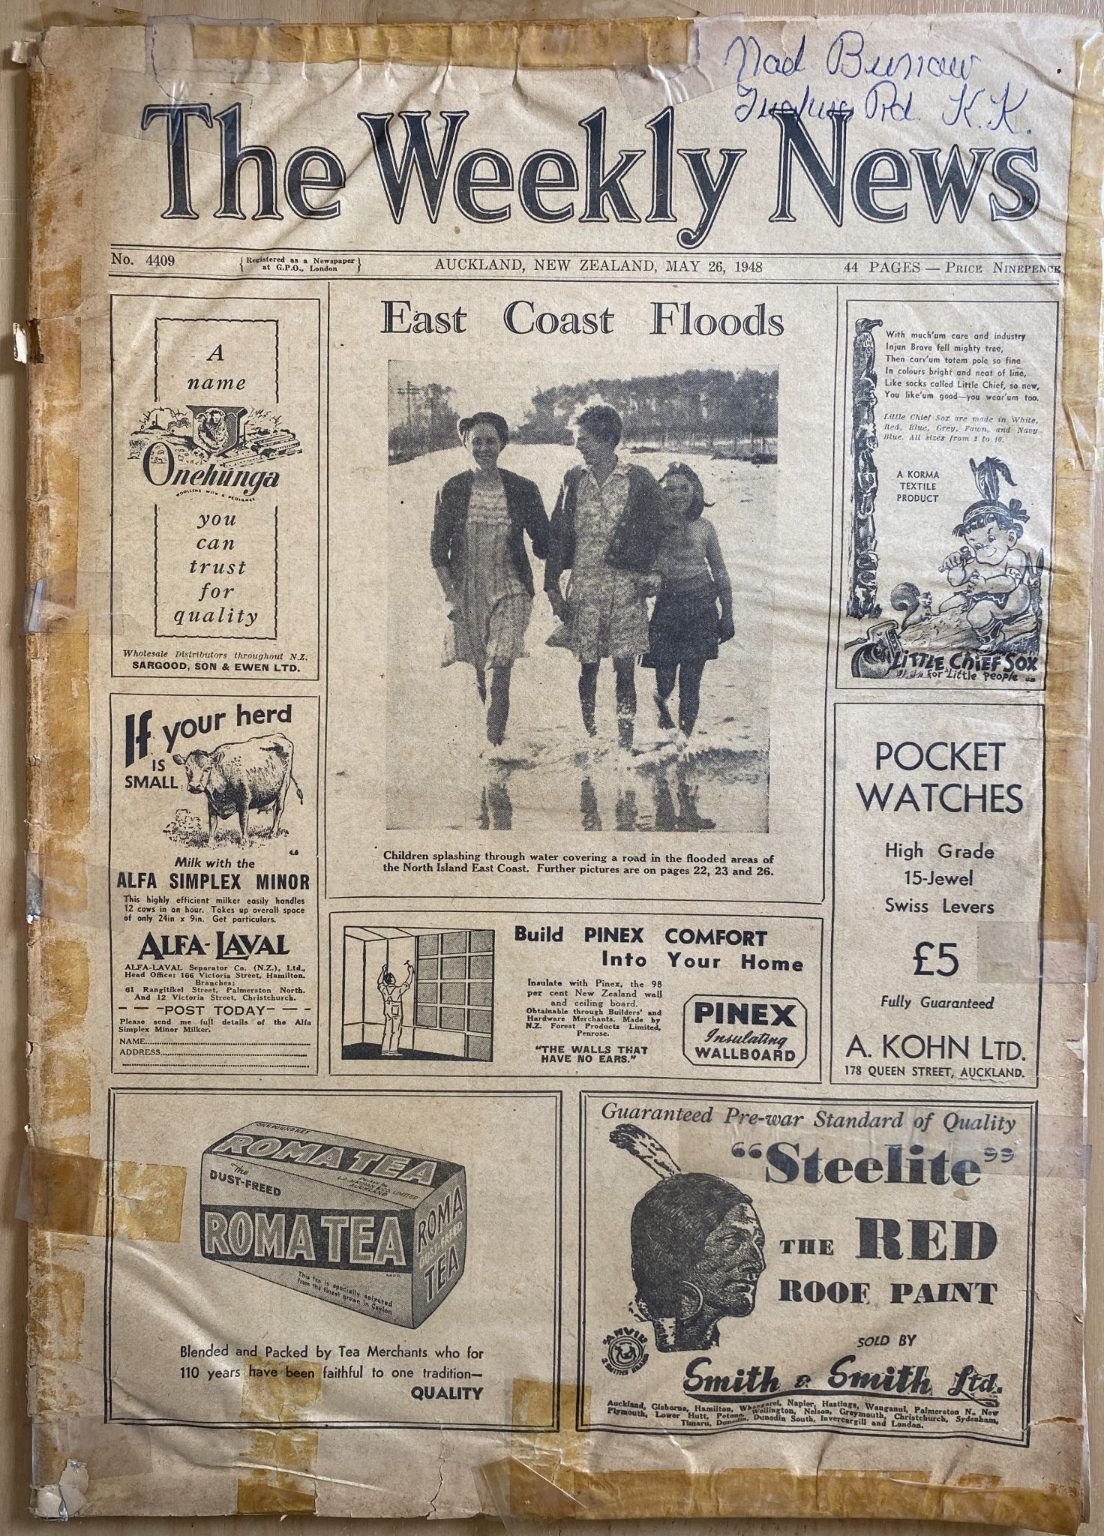 OLD NEWSPAPER: The Weekly News - No. 4409, 26 May 1948